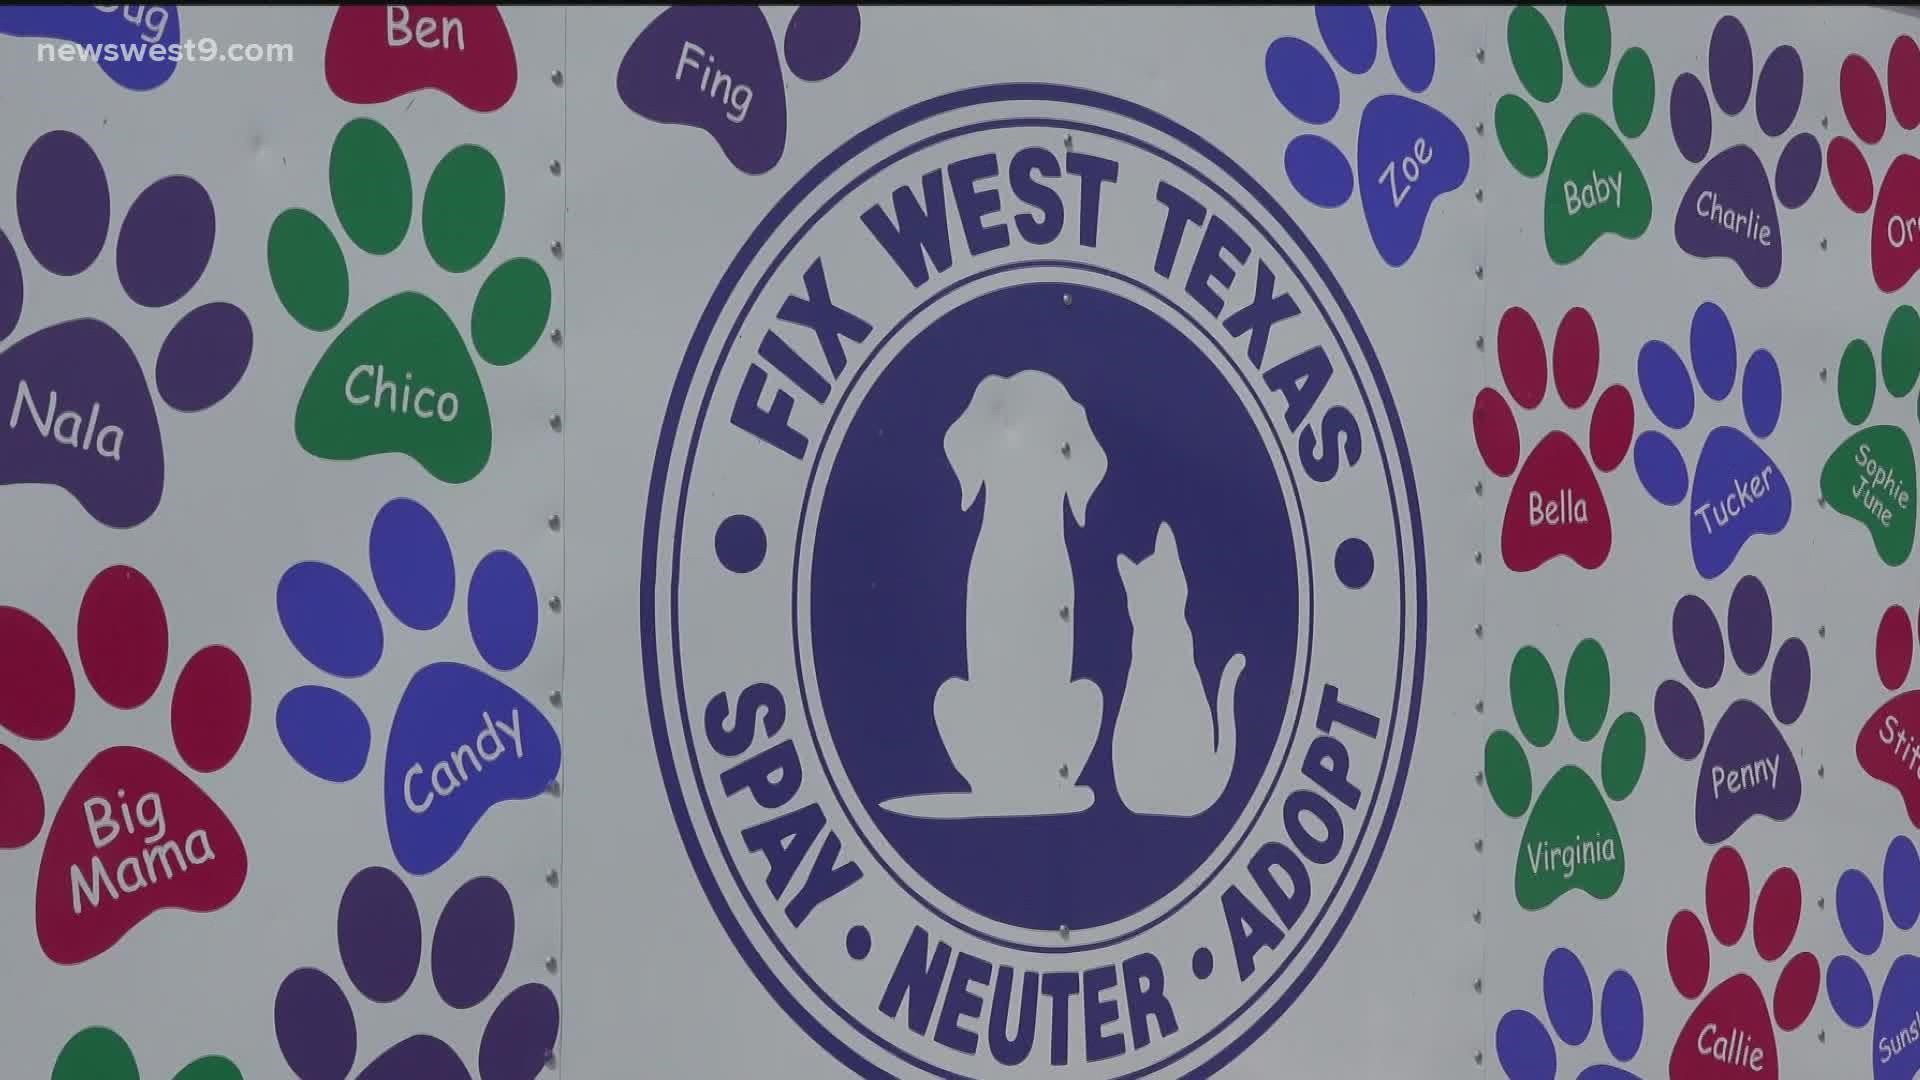 Fix West Texas is building shelters for pets, "Our main goal is to just keep all animals as warm and free from suffering this winter as possible"